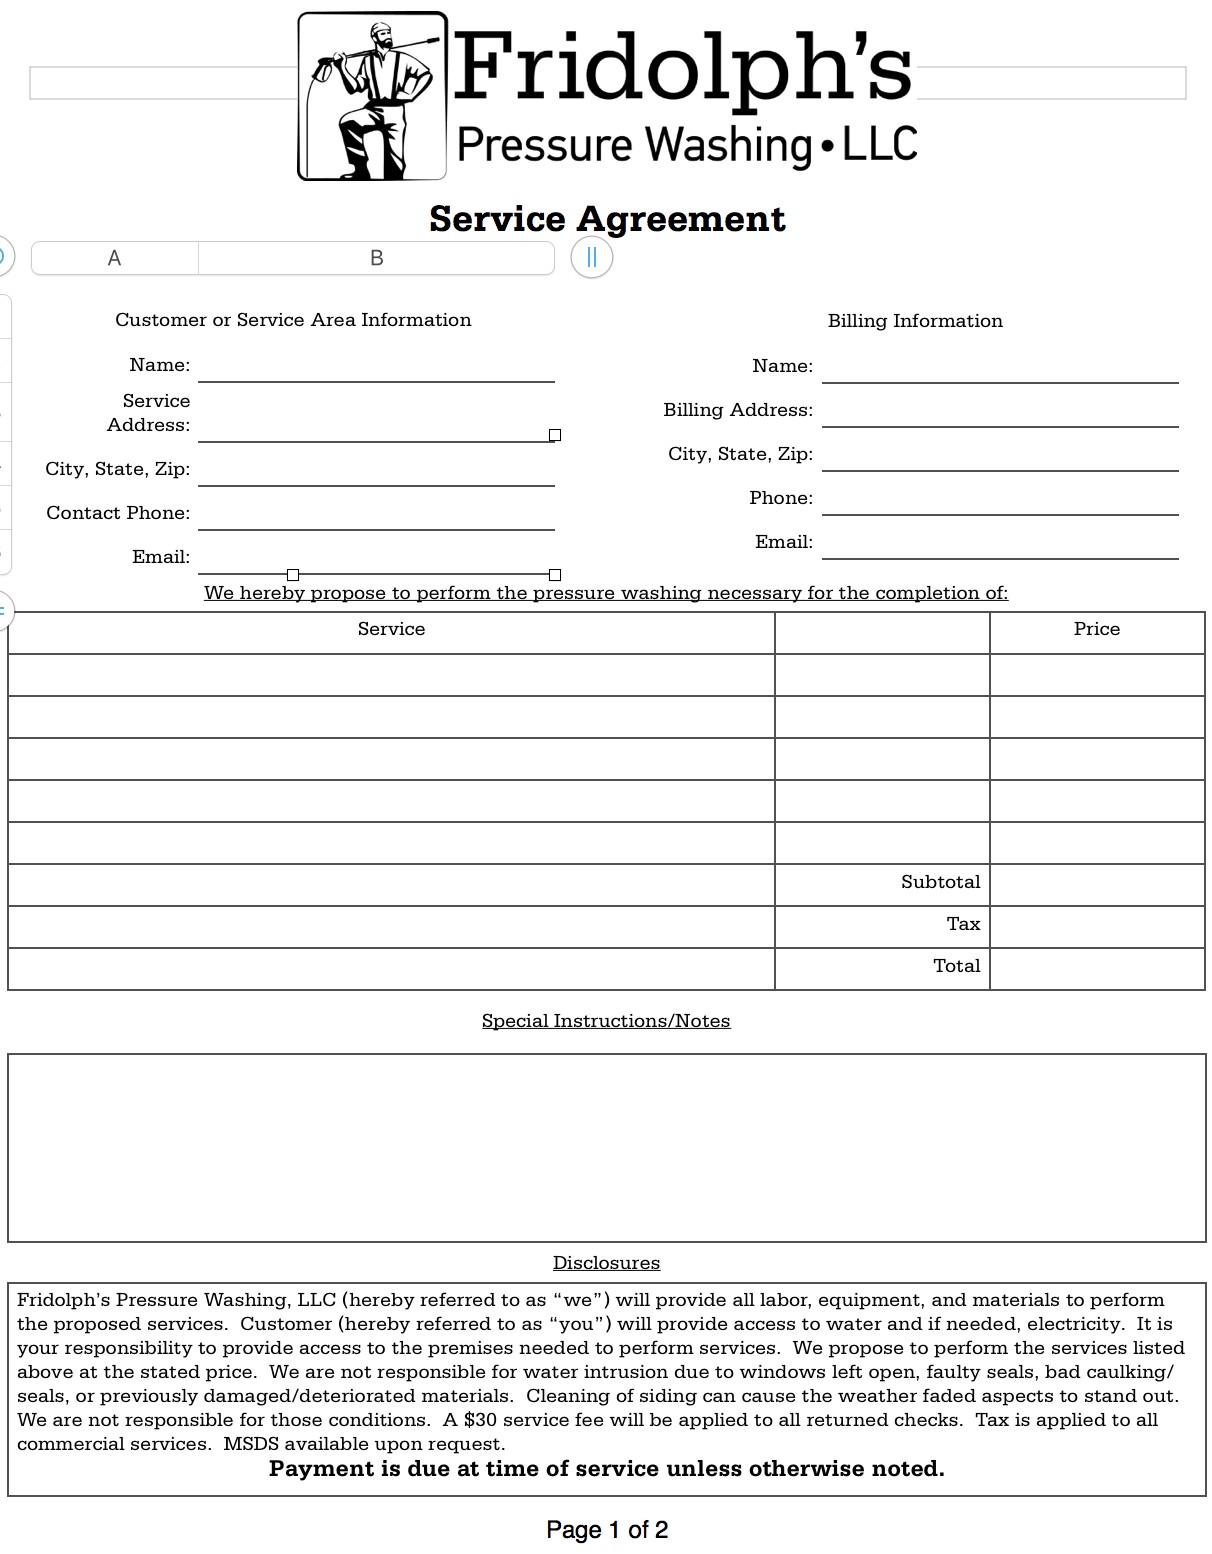 Service Agreement Residential Pressure Washing Resource Document Contract Template